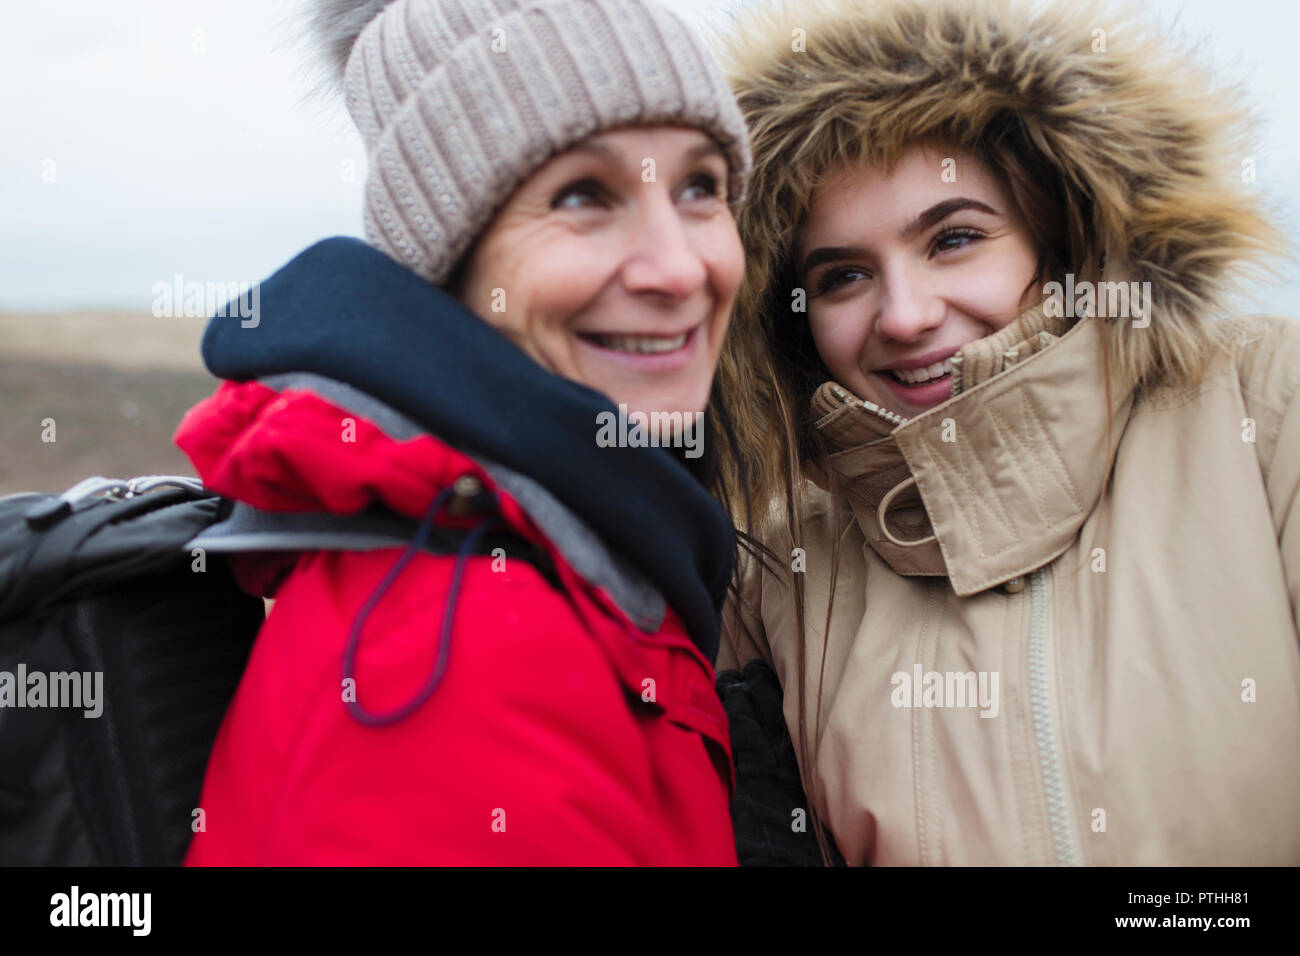 Mother and daughter in warm clothing Stock Photo